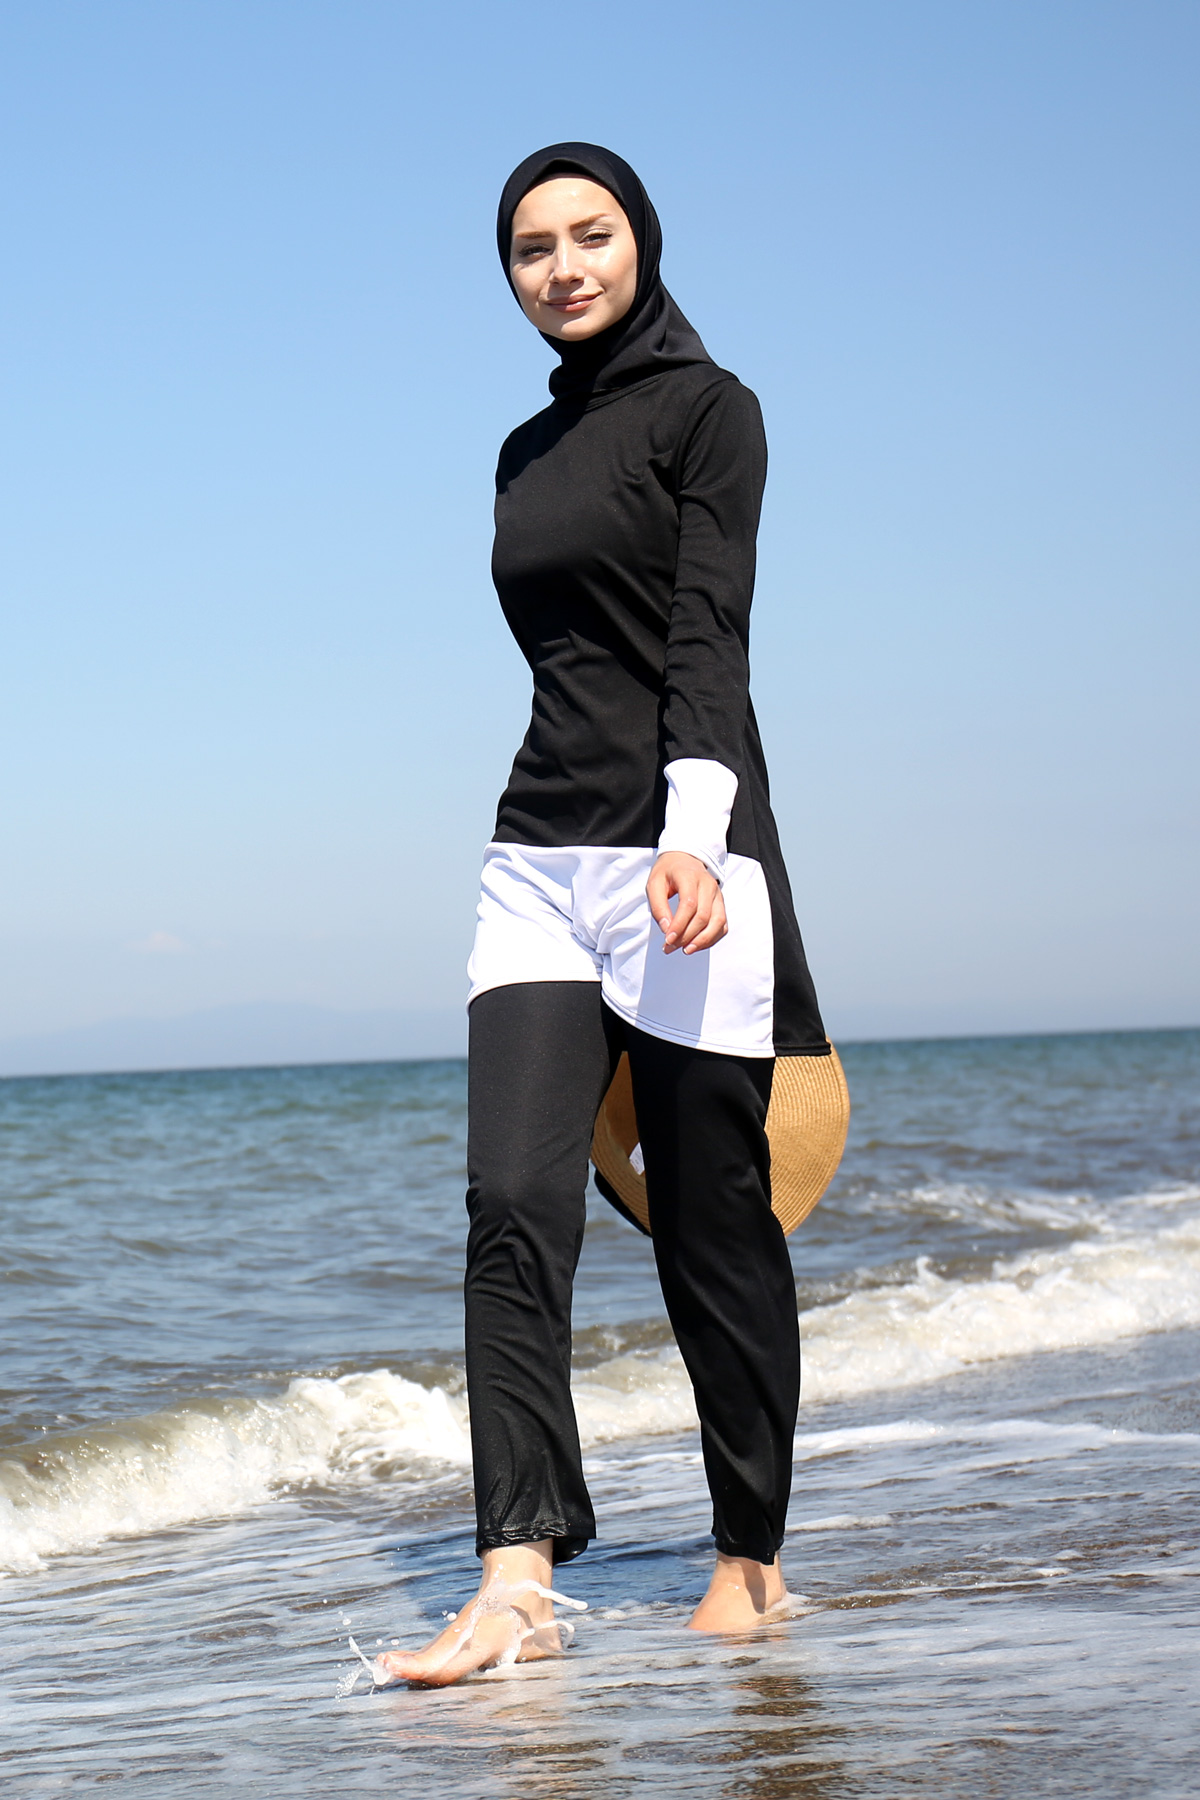 Four Fully Covered Hijab Swimsuit R1010